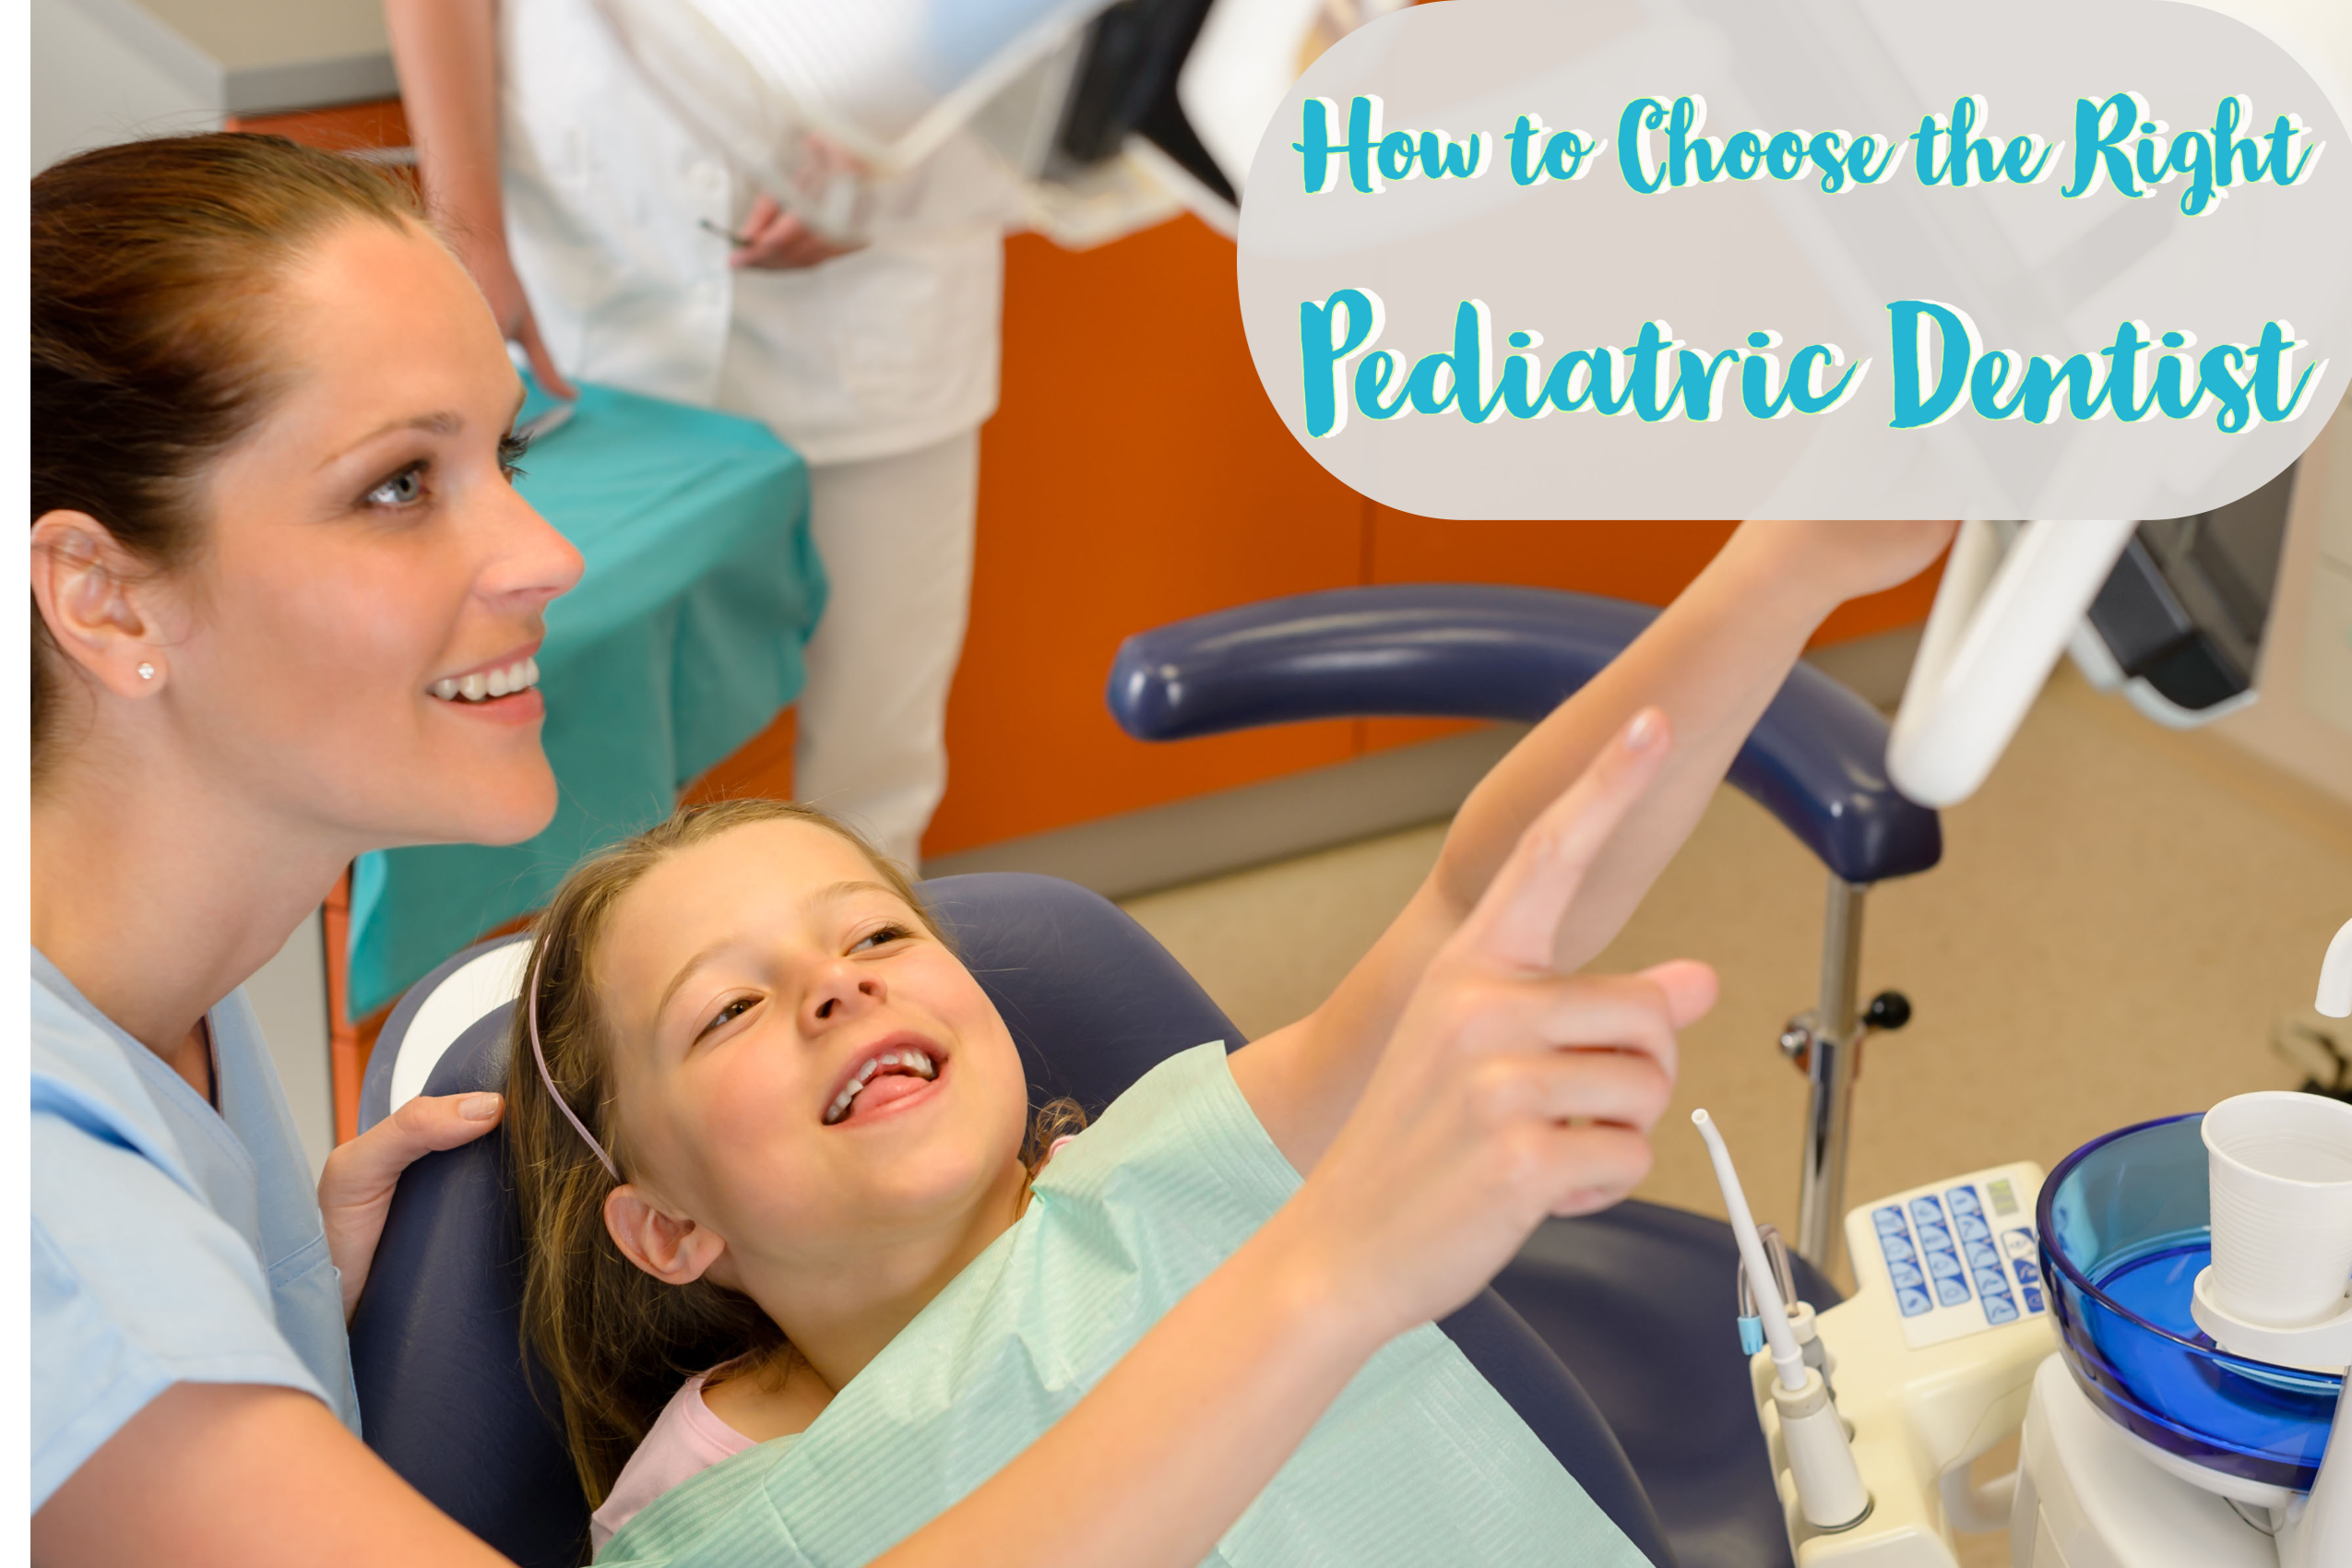 How to Choose the Right Pediatric Dentist